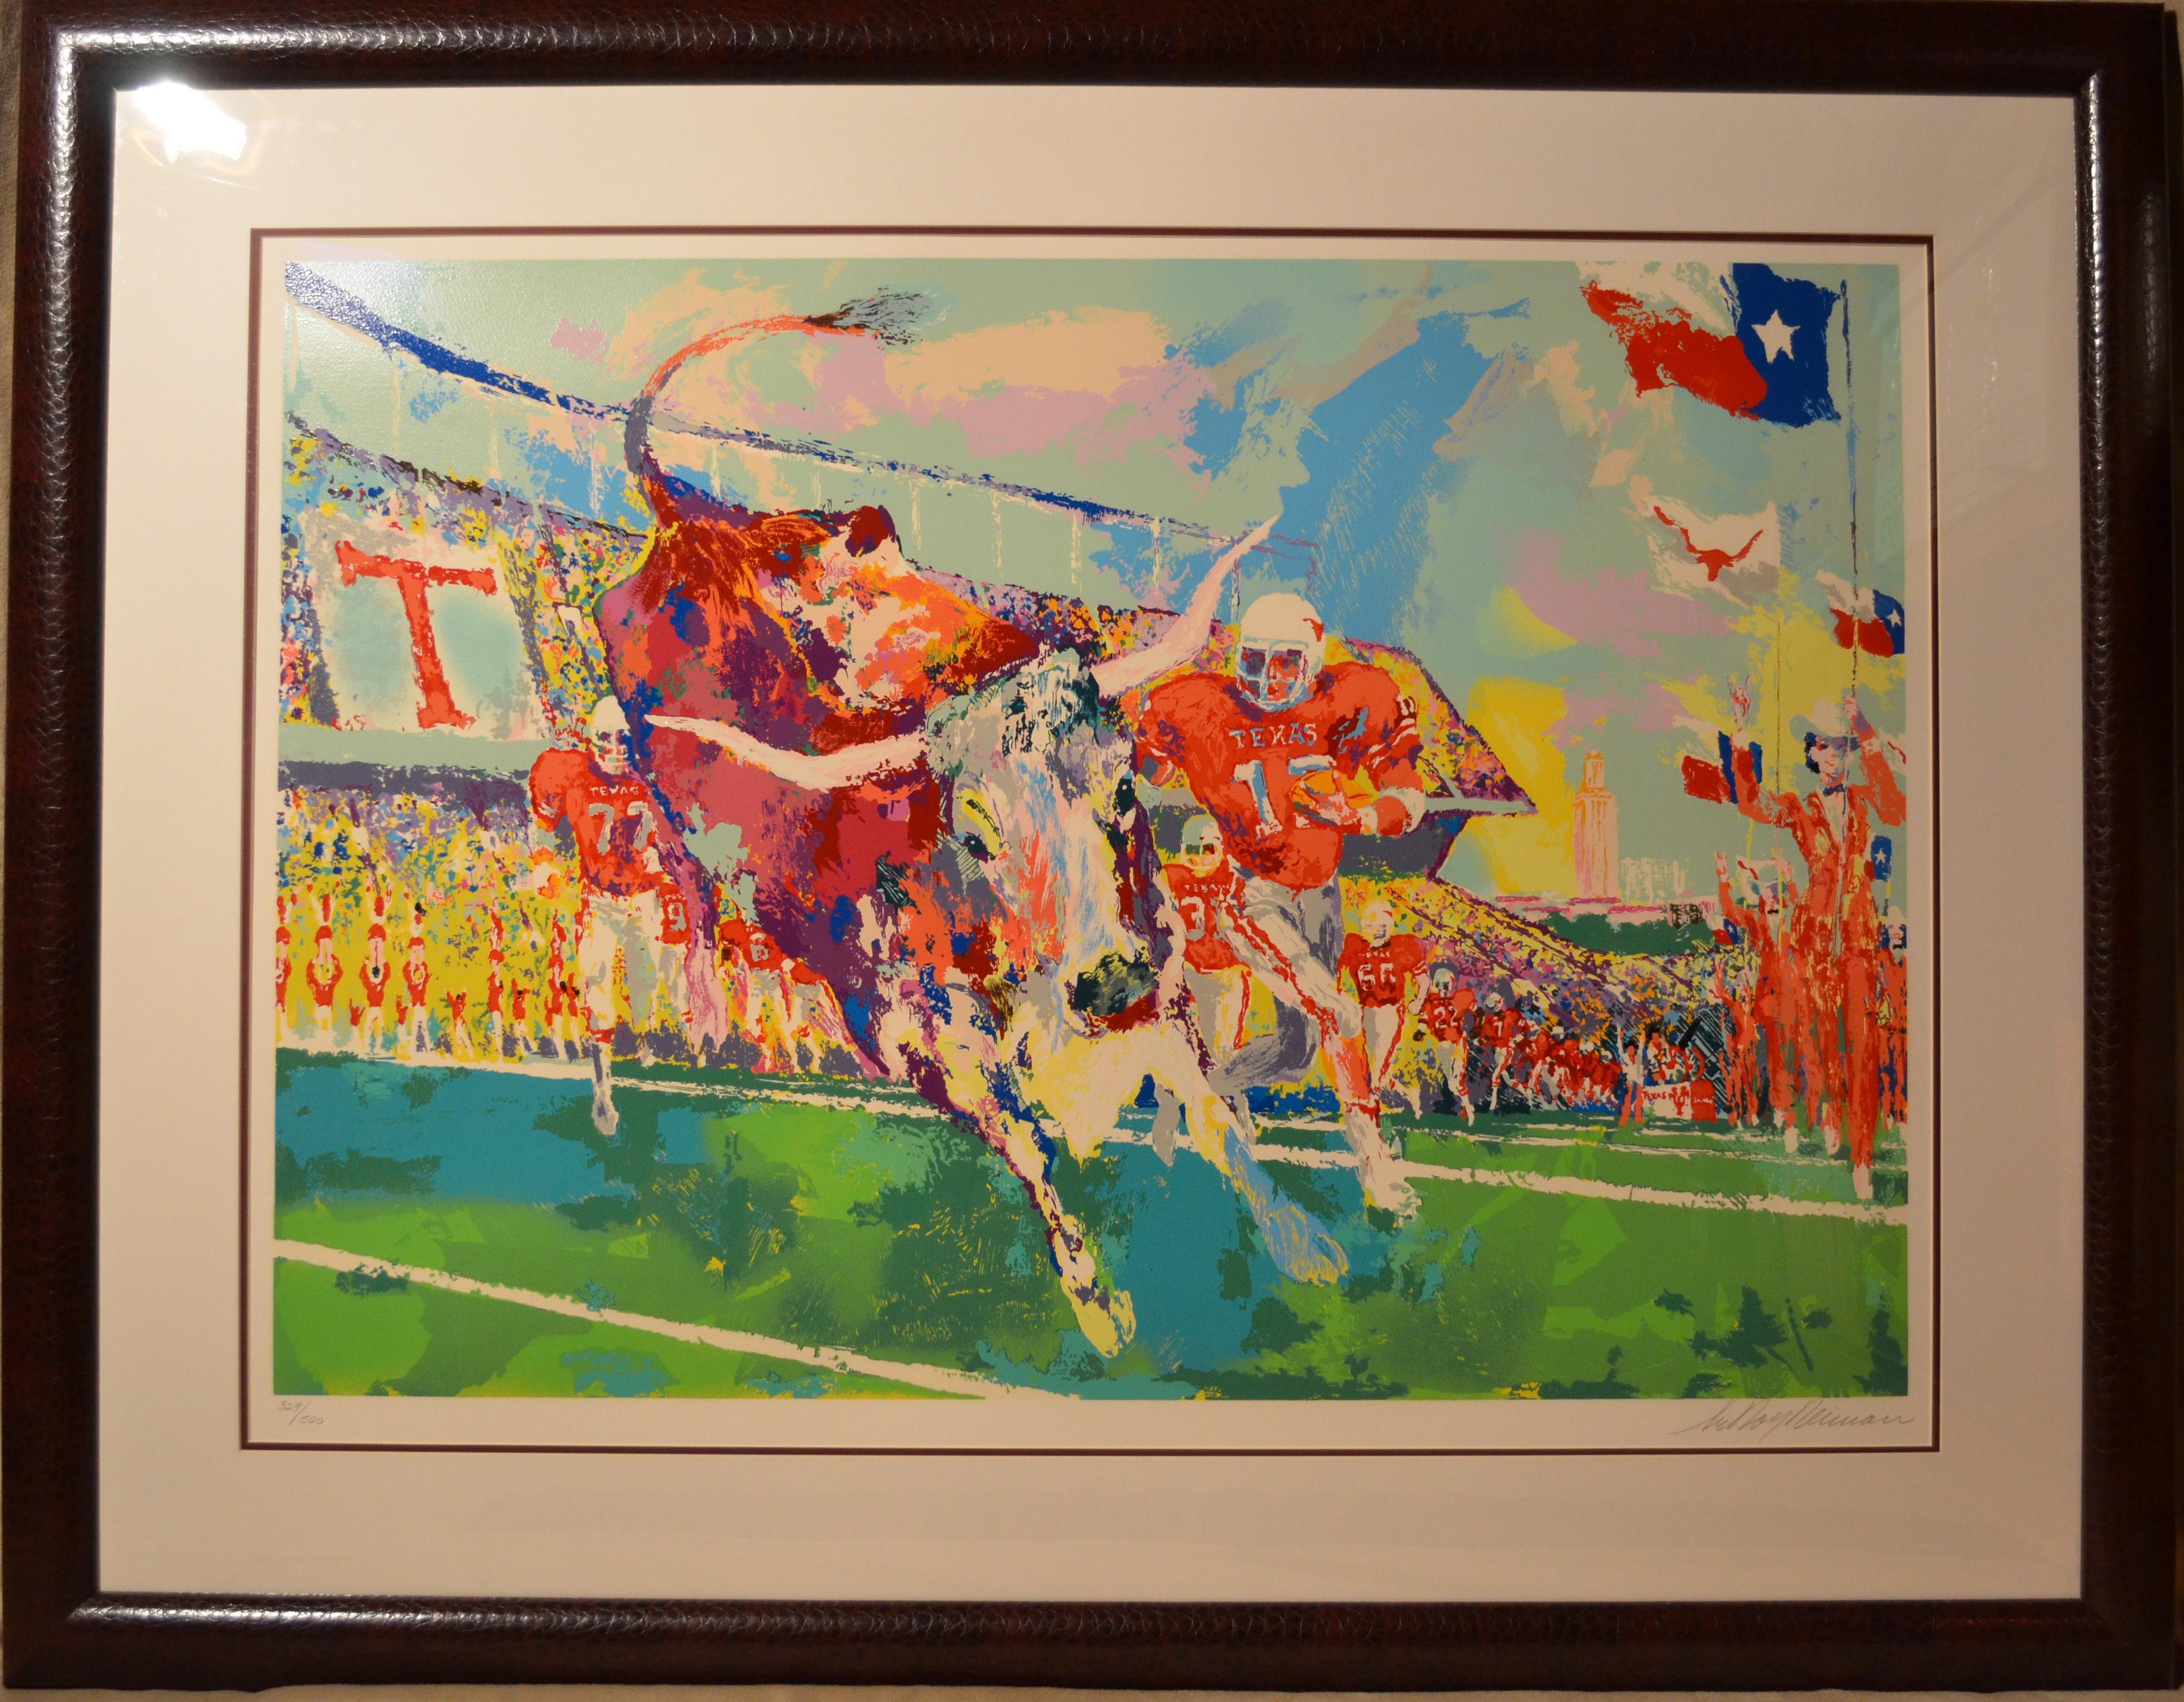 Texas Longhorns - Limited Edition Serigraph by LeRoy Neiman - Print by Leroy Neiman